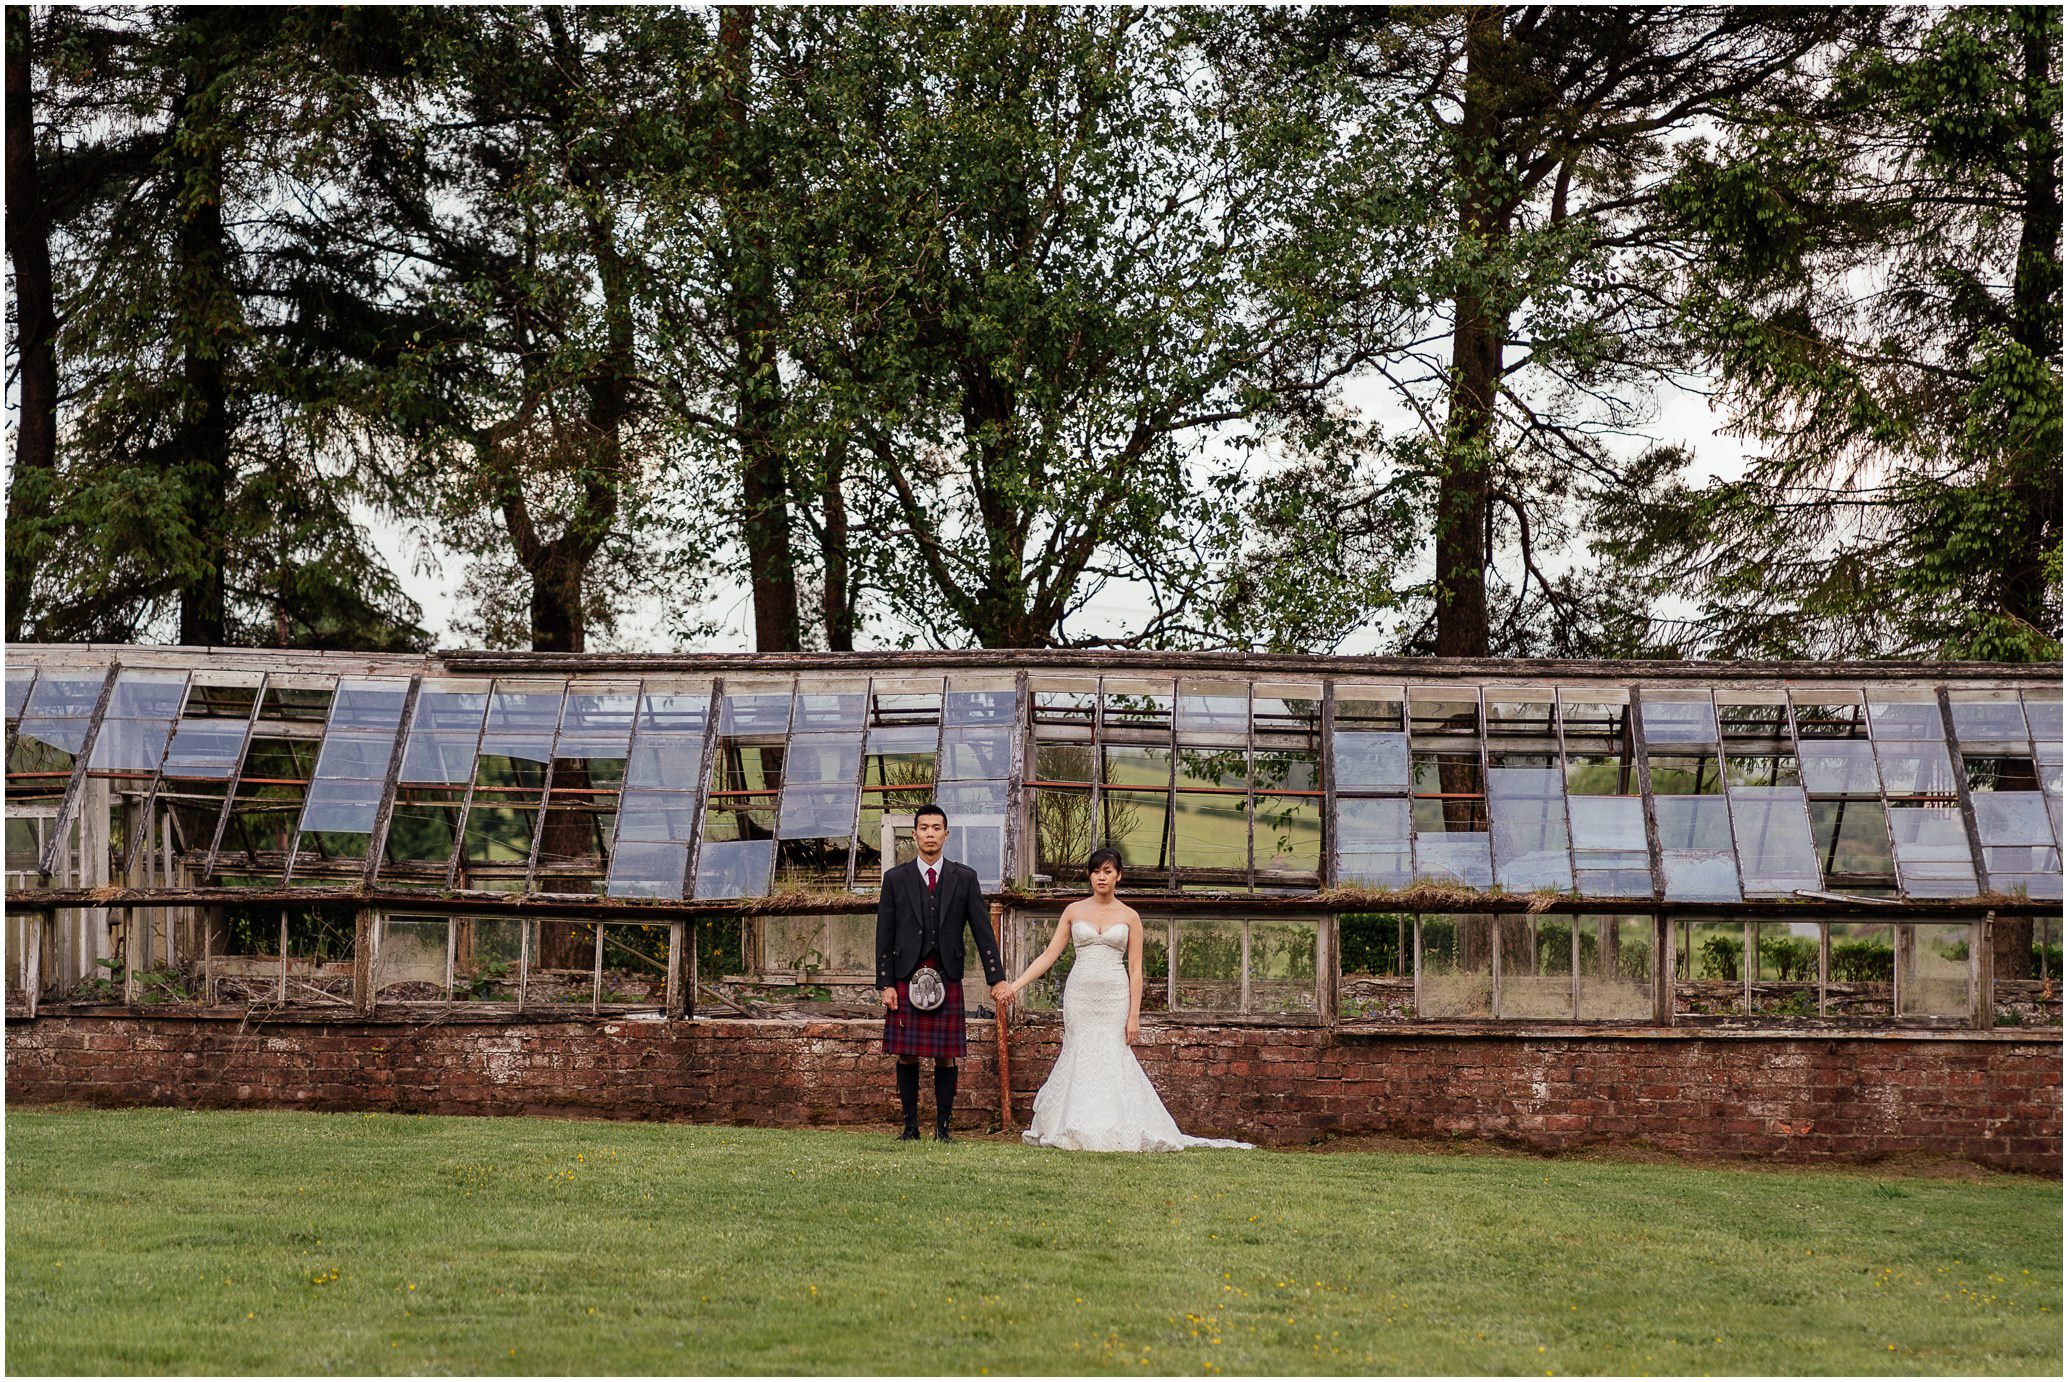 bride and groom hand in hand standing on grass lawn in front of rustic greenhouse in walled garden big trees in background post wedding photoshoot glasgow fotomaki photography